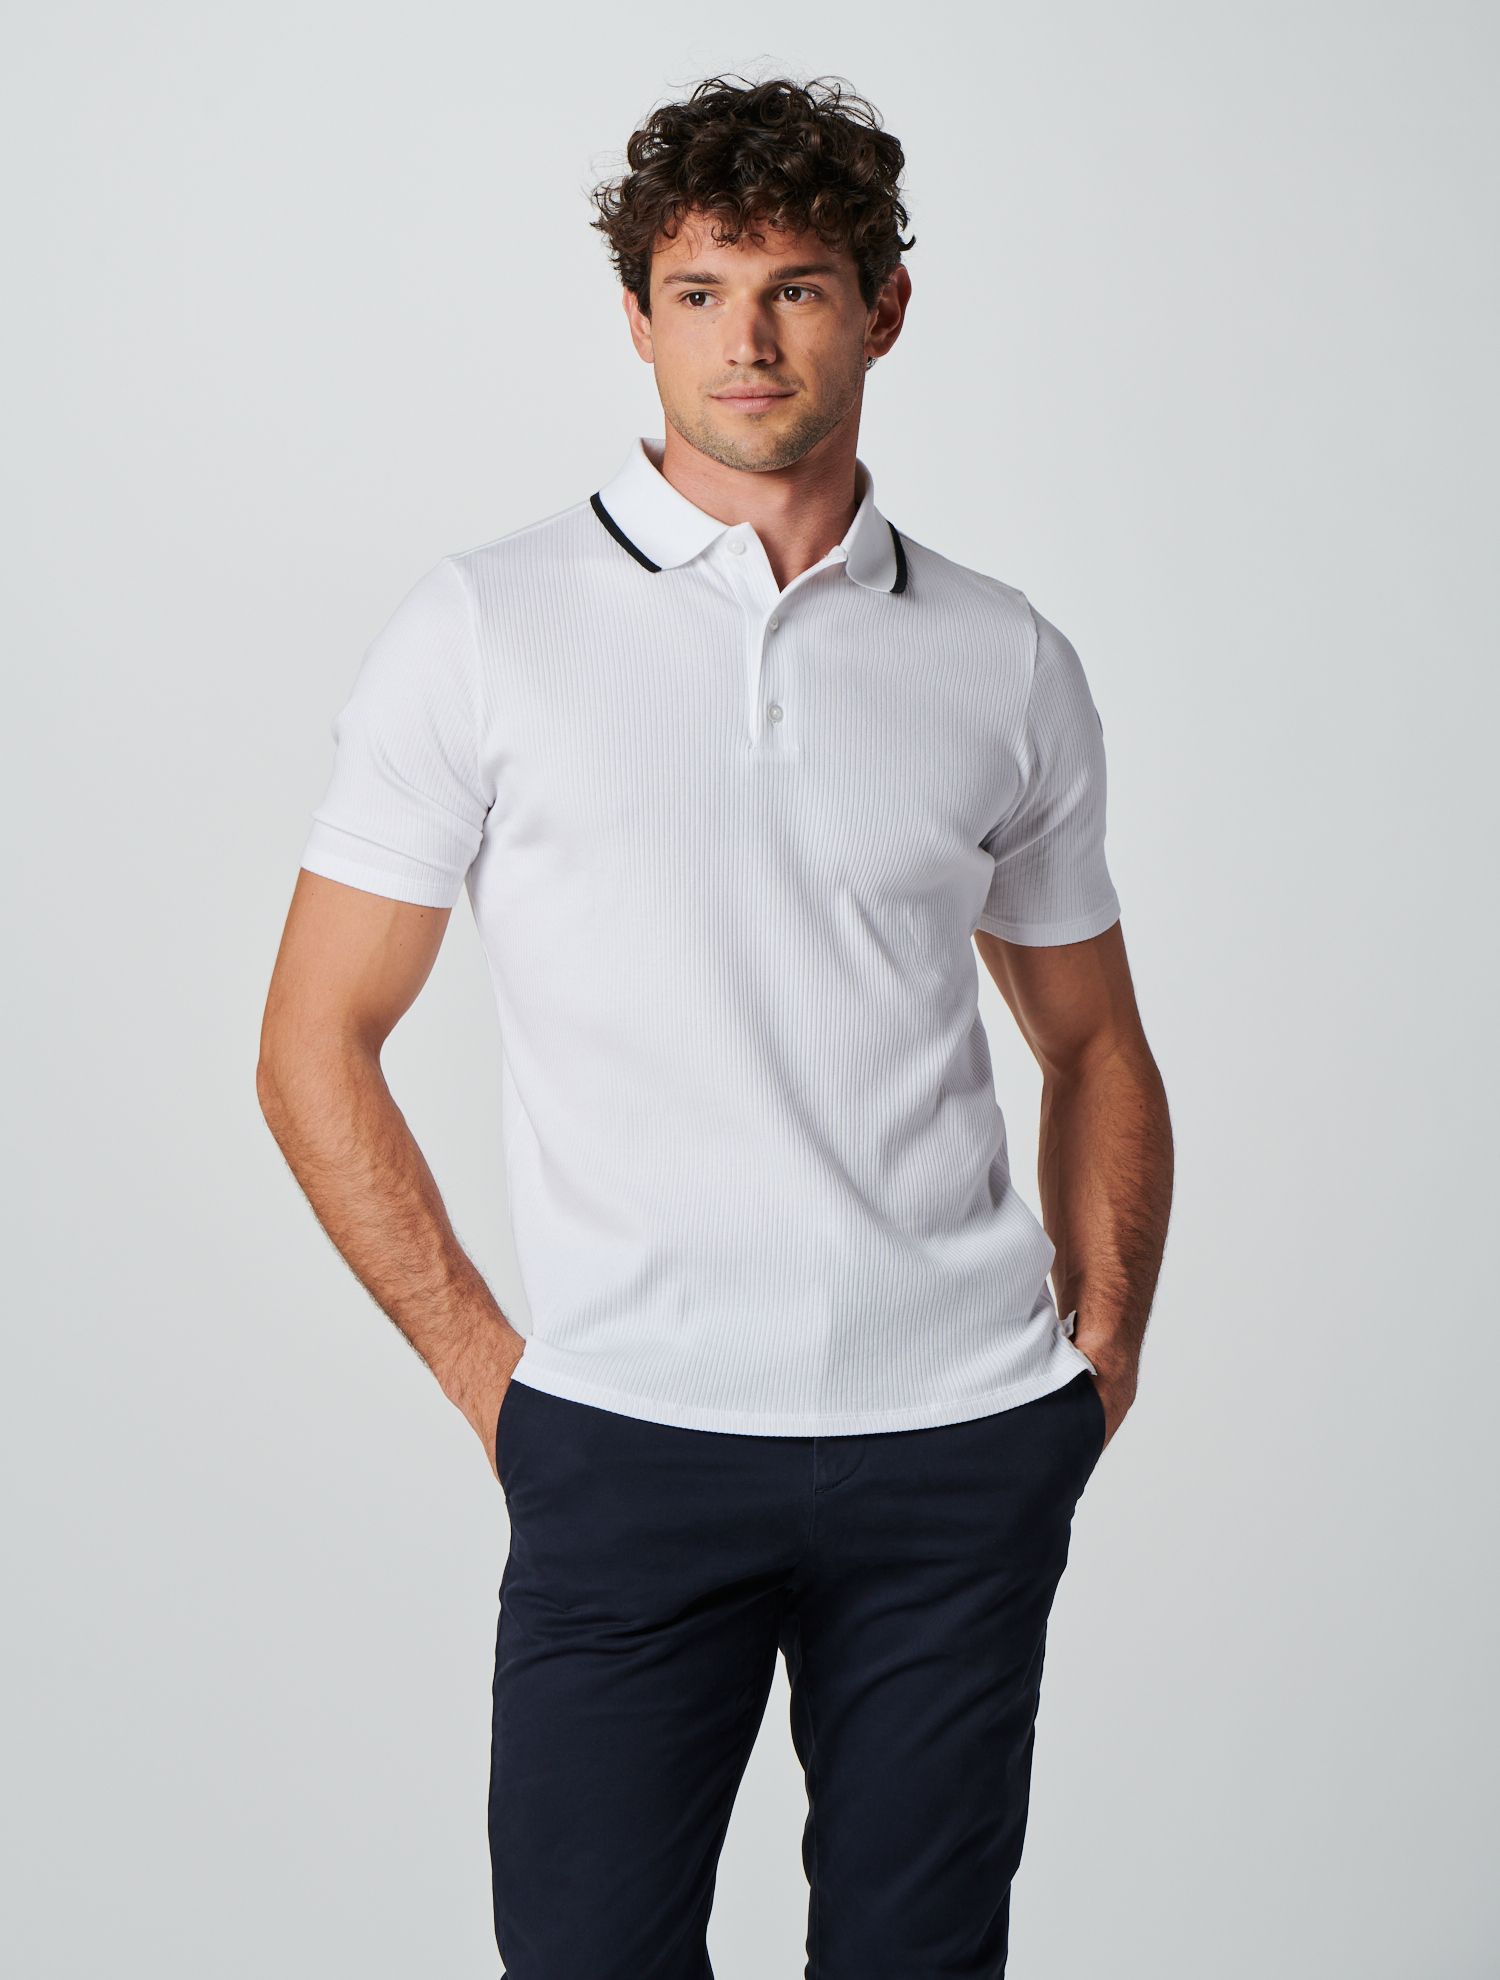 Charles polo : Short-sleeved polo shirt with mother-of-pearl buttons